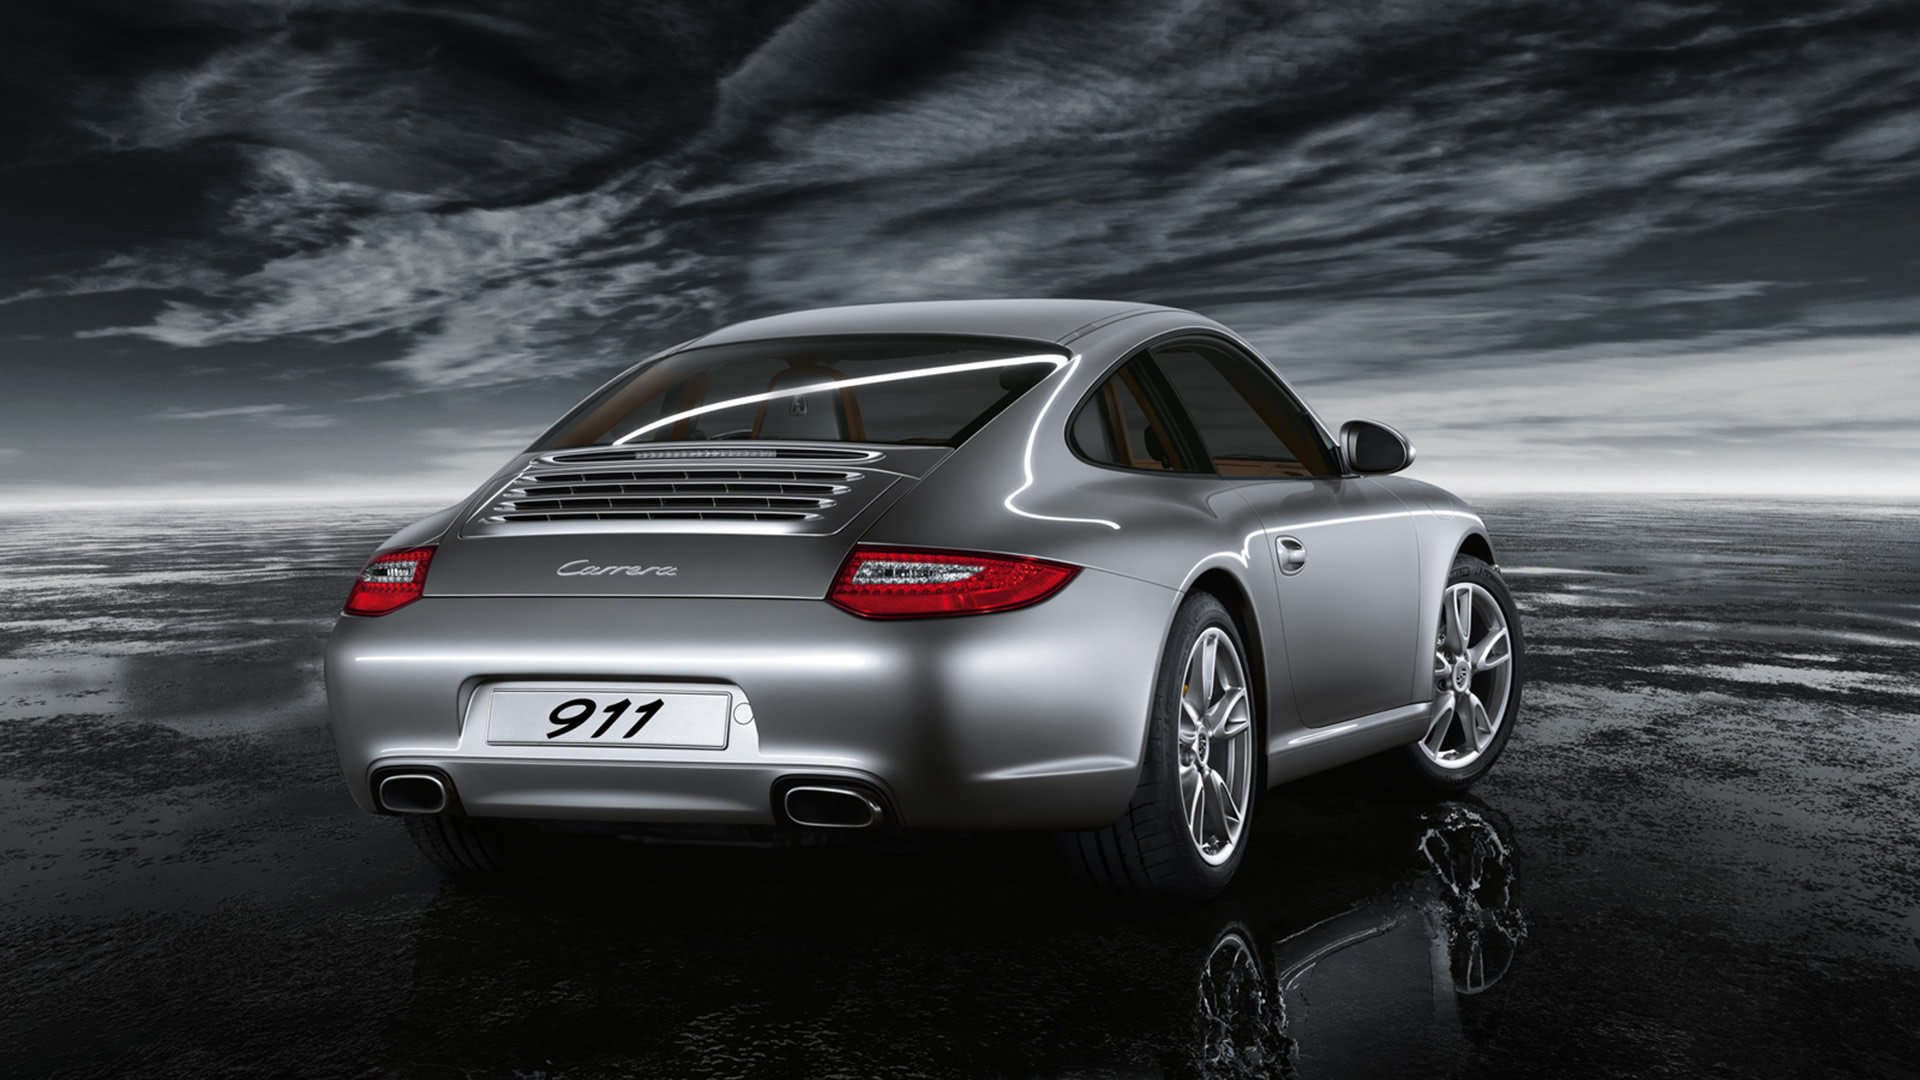 High resolution Porsche full hd 1920x1080 background ID:19754 for PC